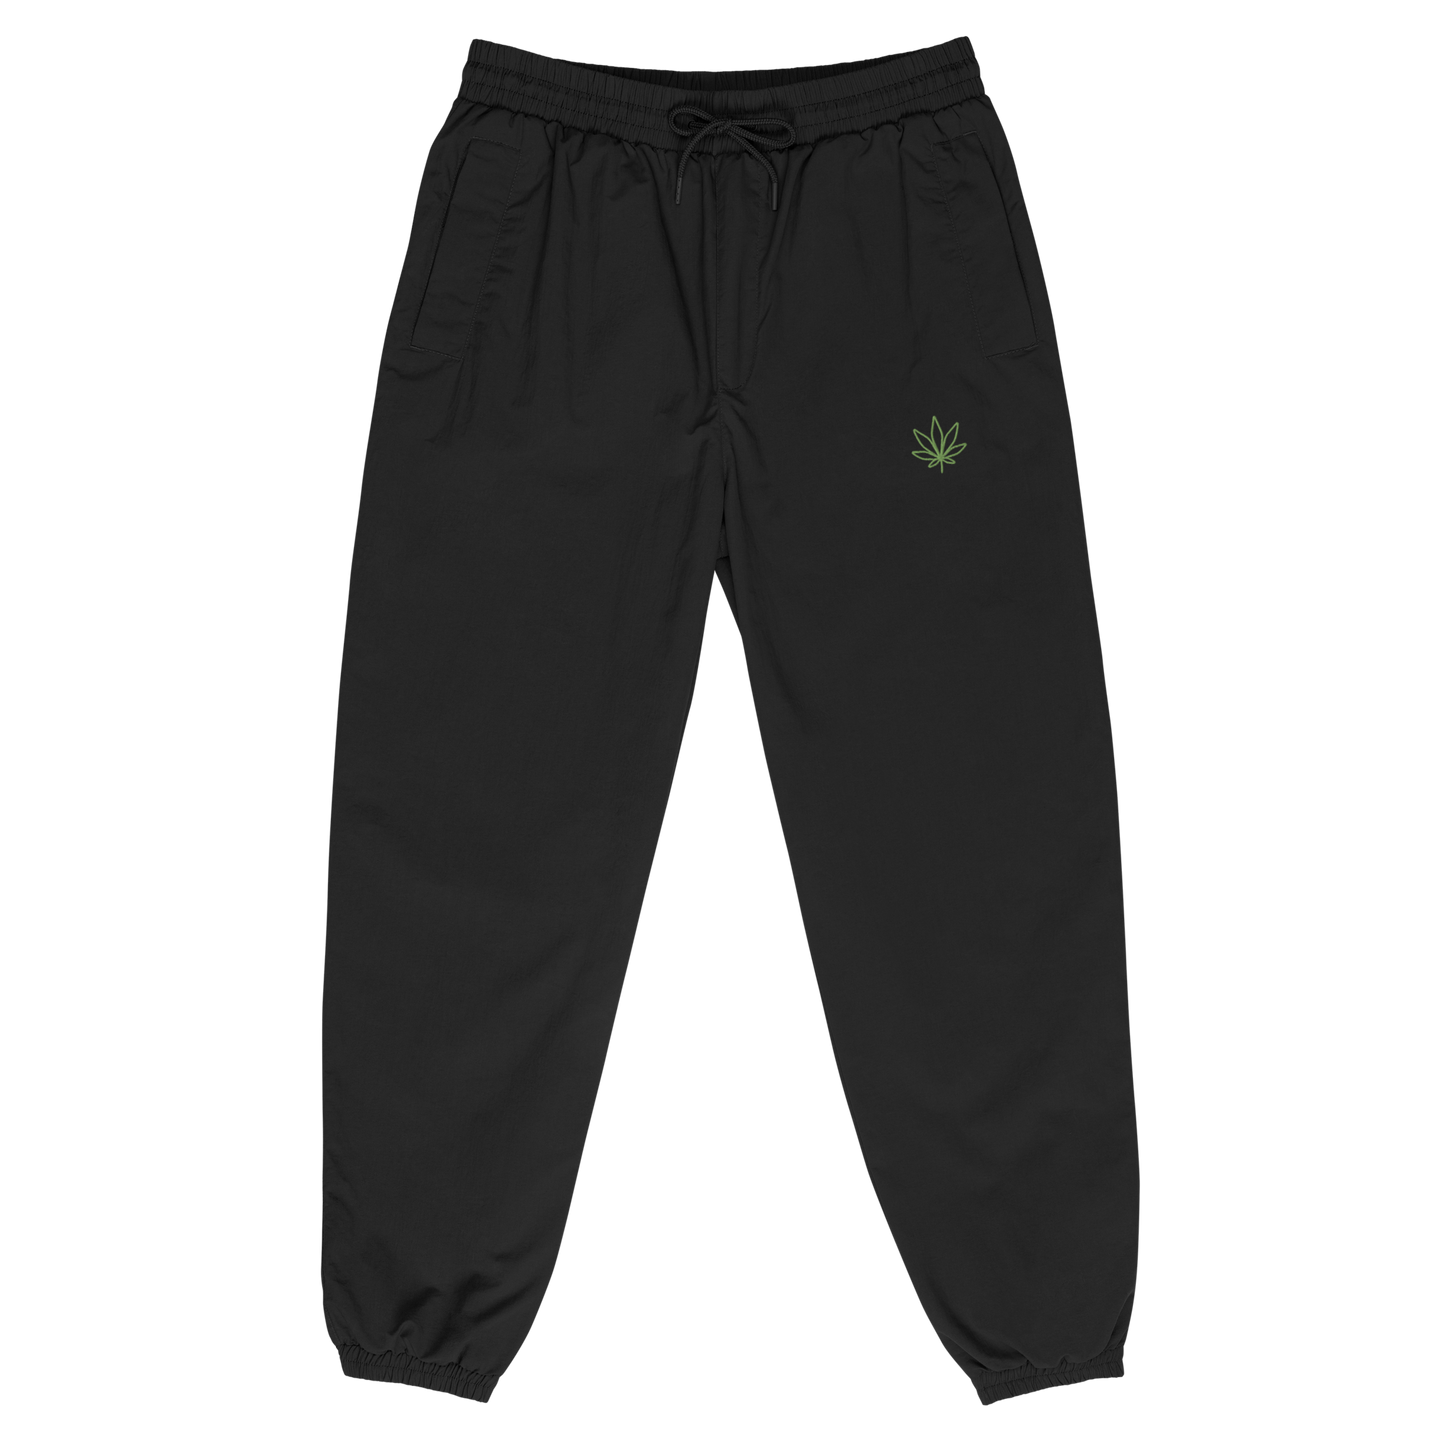 The Cannabusinessmen/women tracksuit trousers - Embroidered cannabis leaf